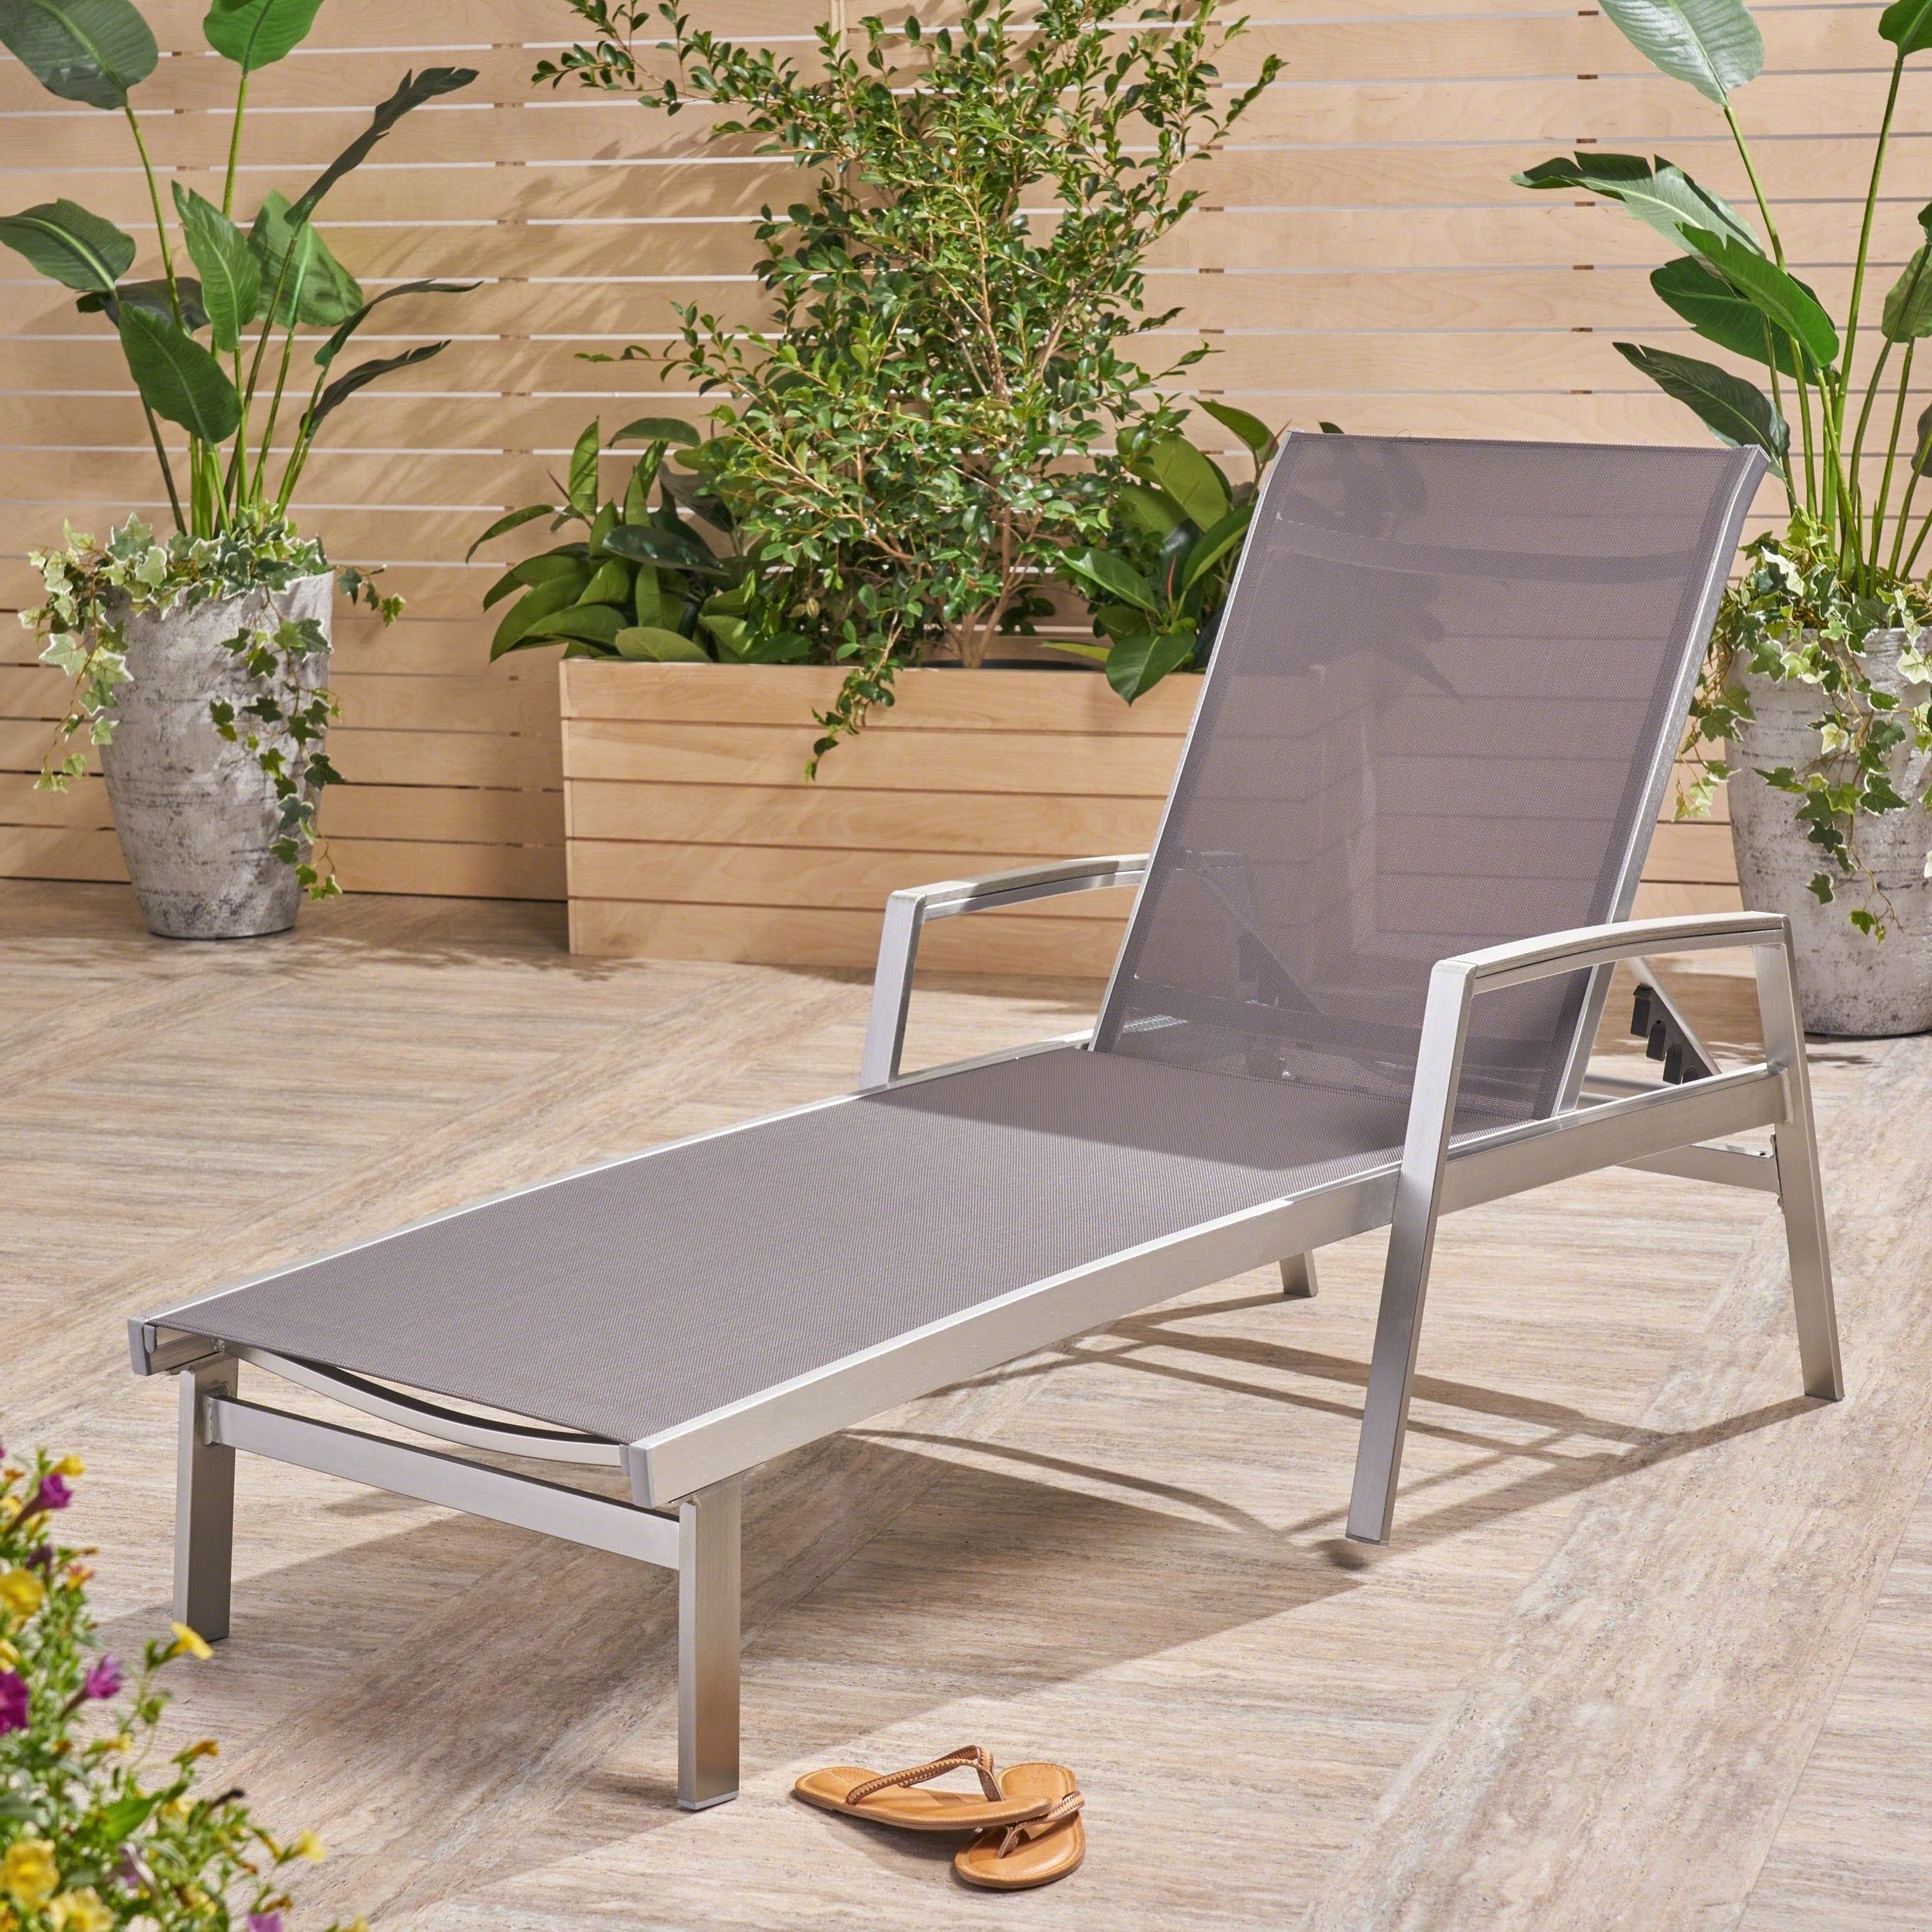 25 Collection Of Outdoor Aluminum Chaise Lounges